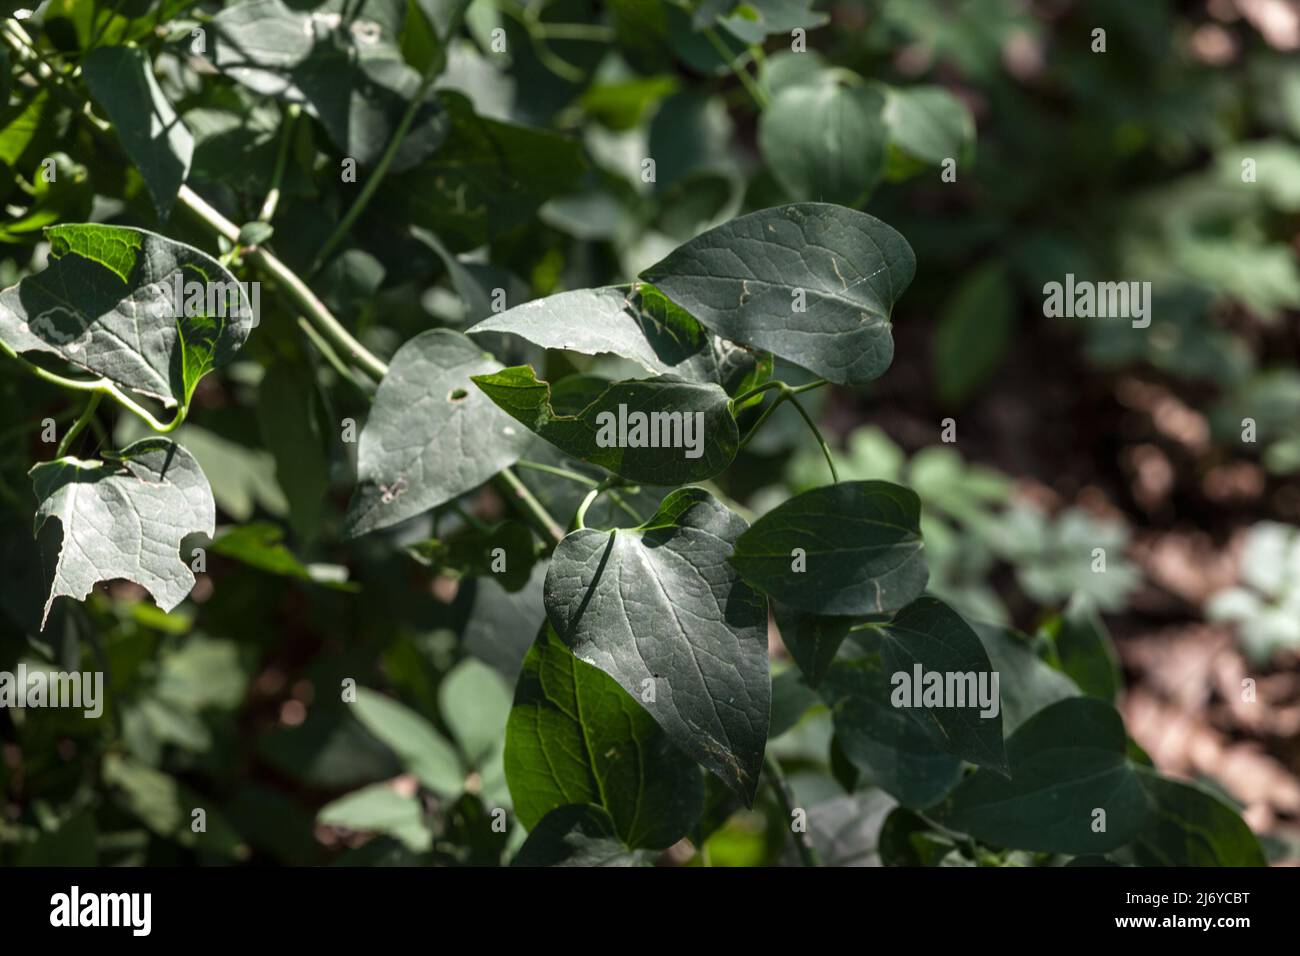 Picture of a focus on sarsaparille leaf, also called common smilax. Smilax aspera, with common names common smilax, rough bindweed, sarsaparille, and Stock Photo